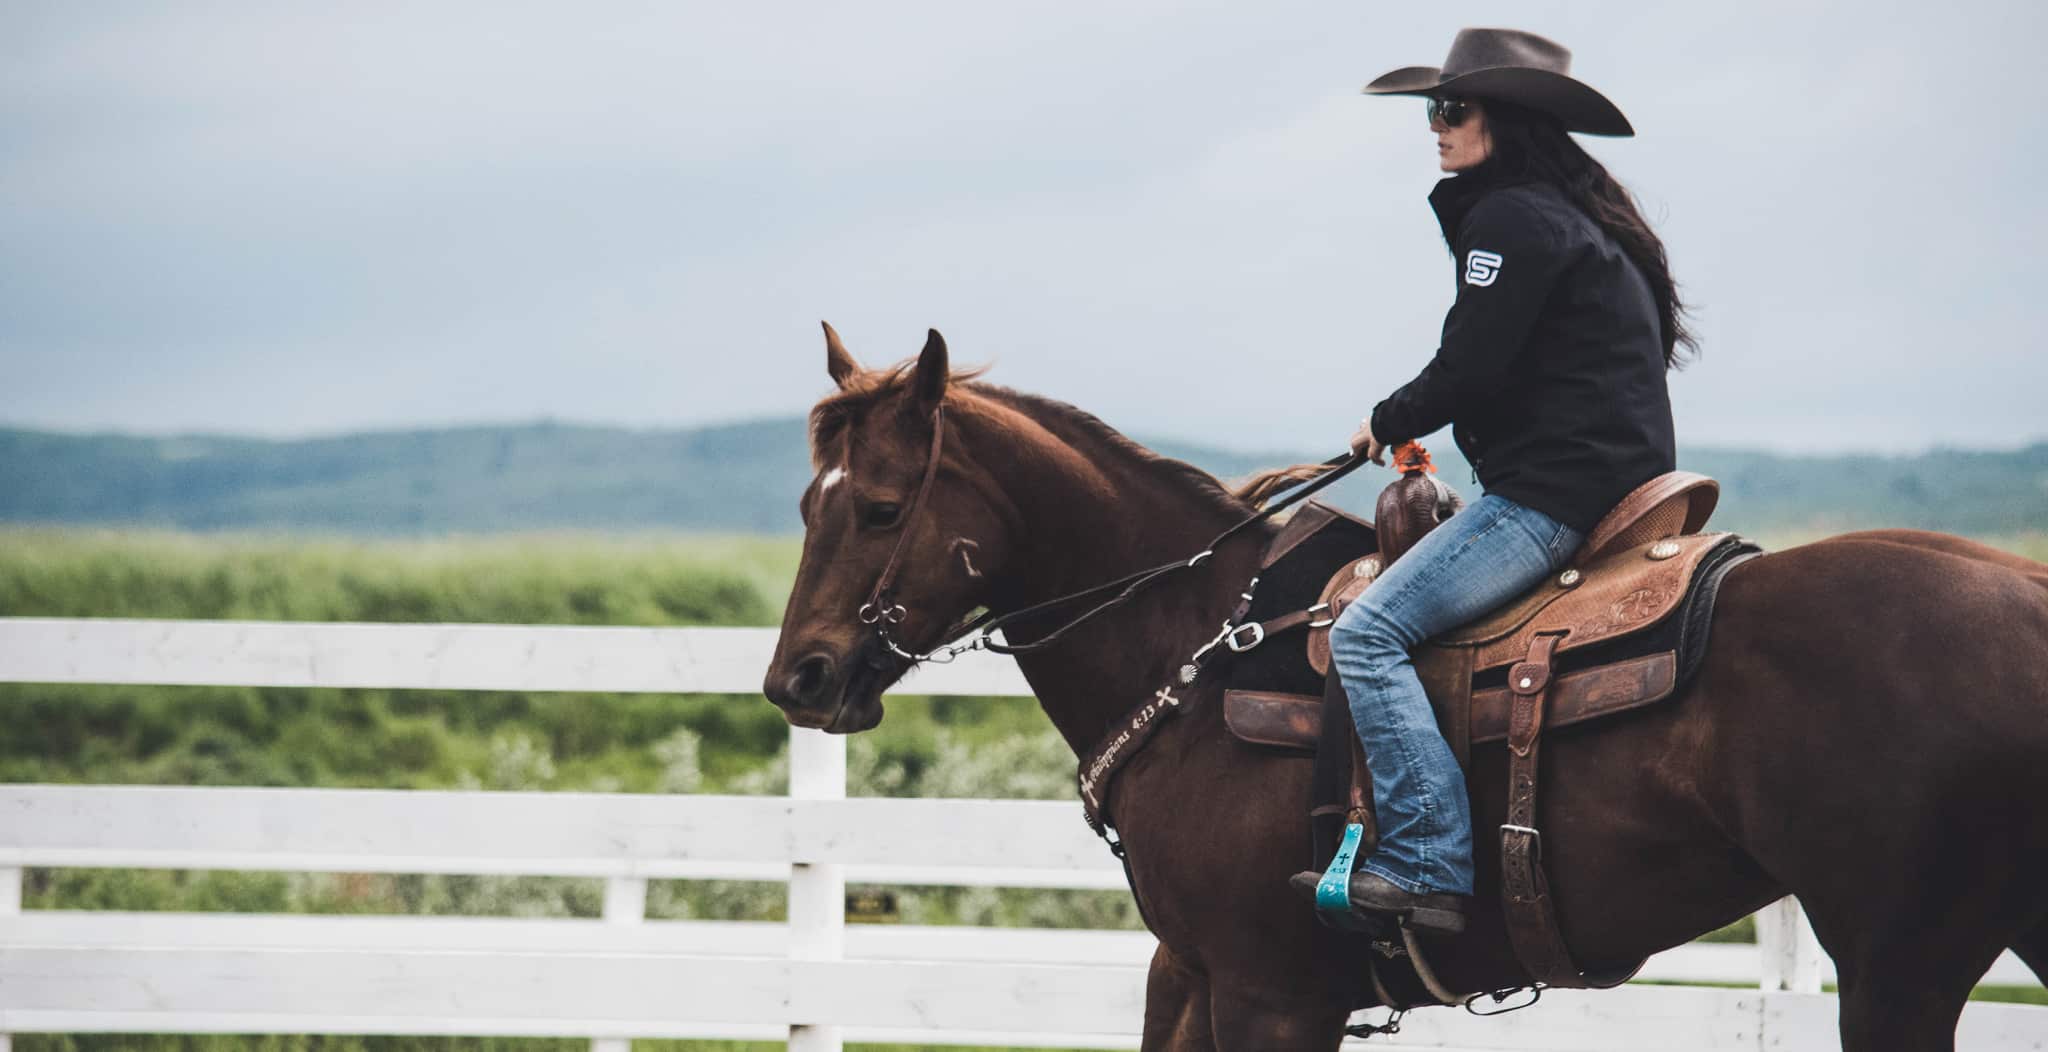 Amara Duxbury Barrel Racing Professional. StreamZ Global Advanced magnetic Technology Home Page Slider Image for EQU StreamZ, YOU StreamZ or DOG StreamZ. Introducing advanced magnetic therapy for dogs horses and humans for joint care and wellbeing.  